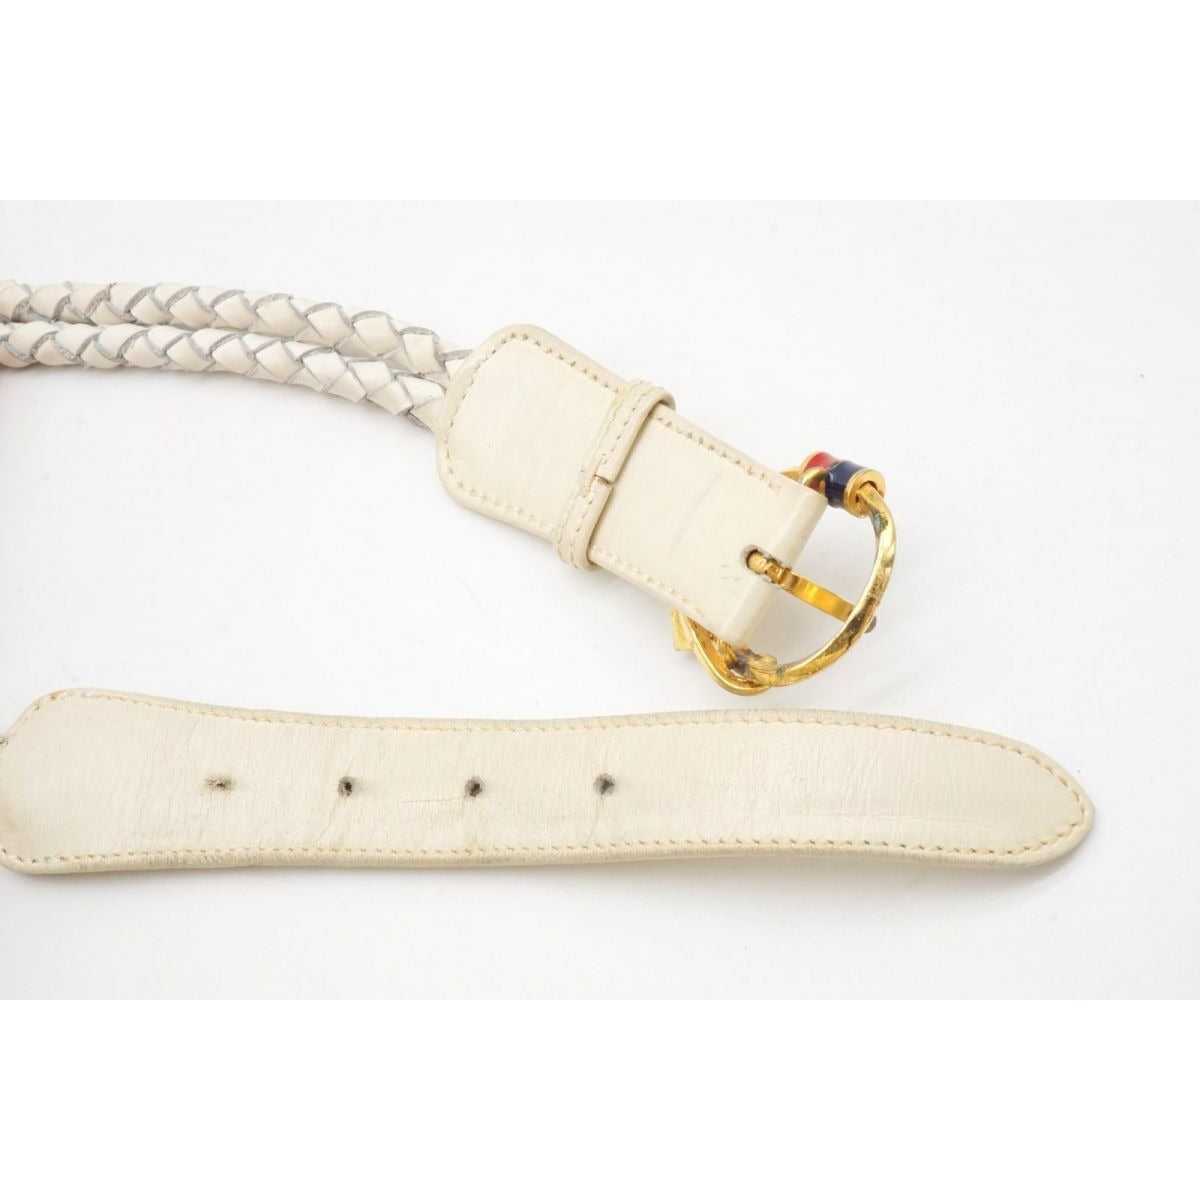 vintage, Gucci, size 80/32, white leather belt with a round, gold buckle with red and blue enamel & two braided leather strands